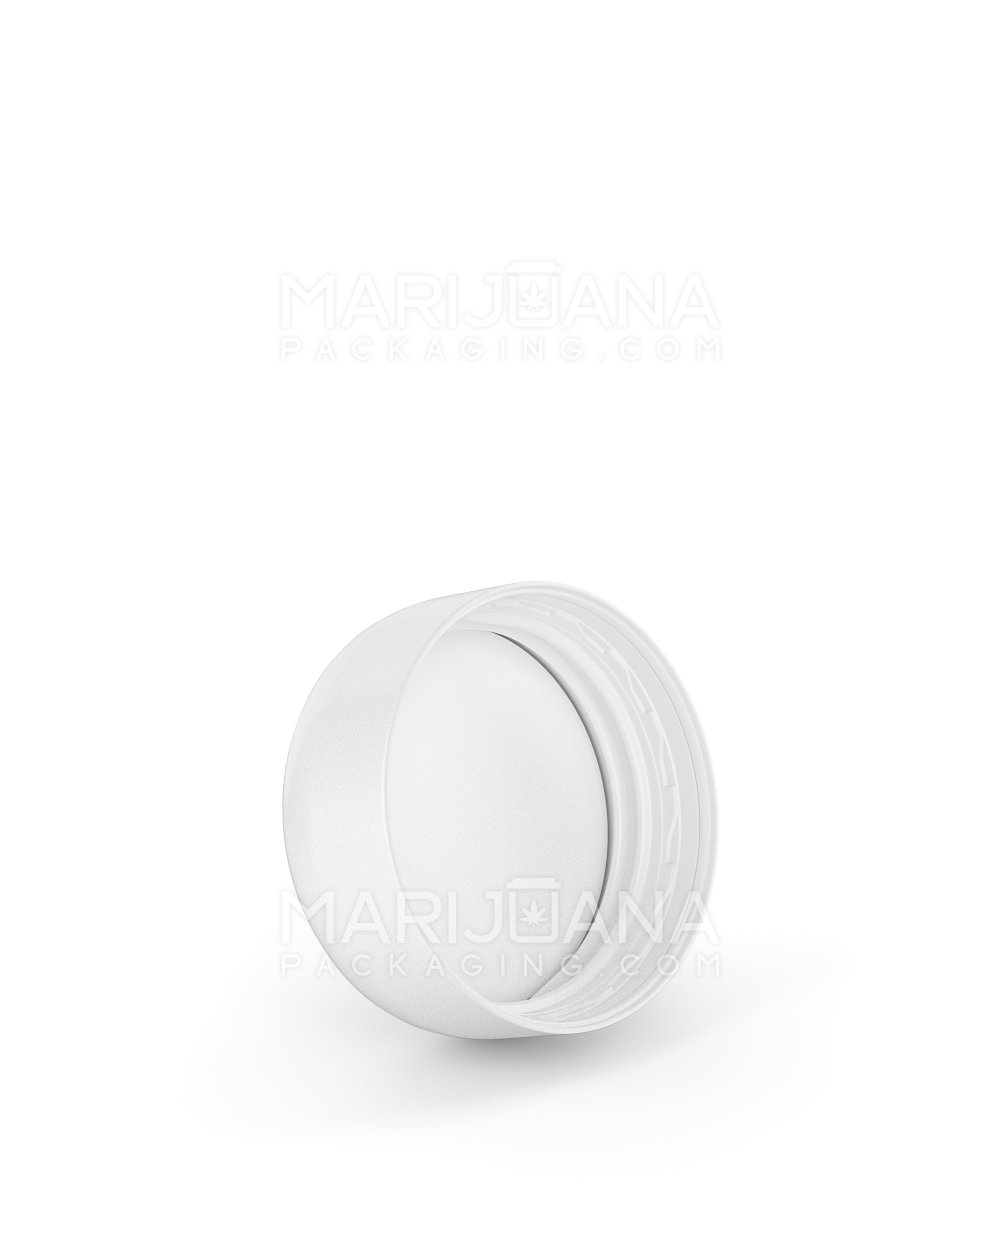 Child Resistant | Smooth Push Down & Turn Plastic Caps w/ Foam Liner | 29mm - Semi Gloss White - 504 Count - 2